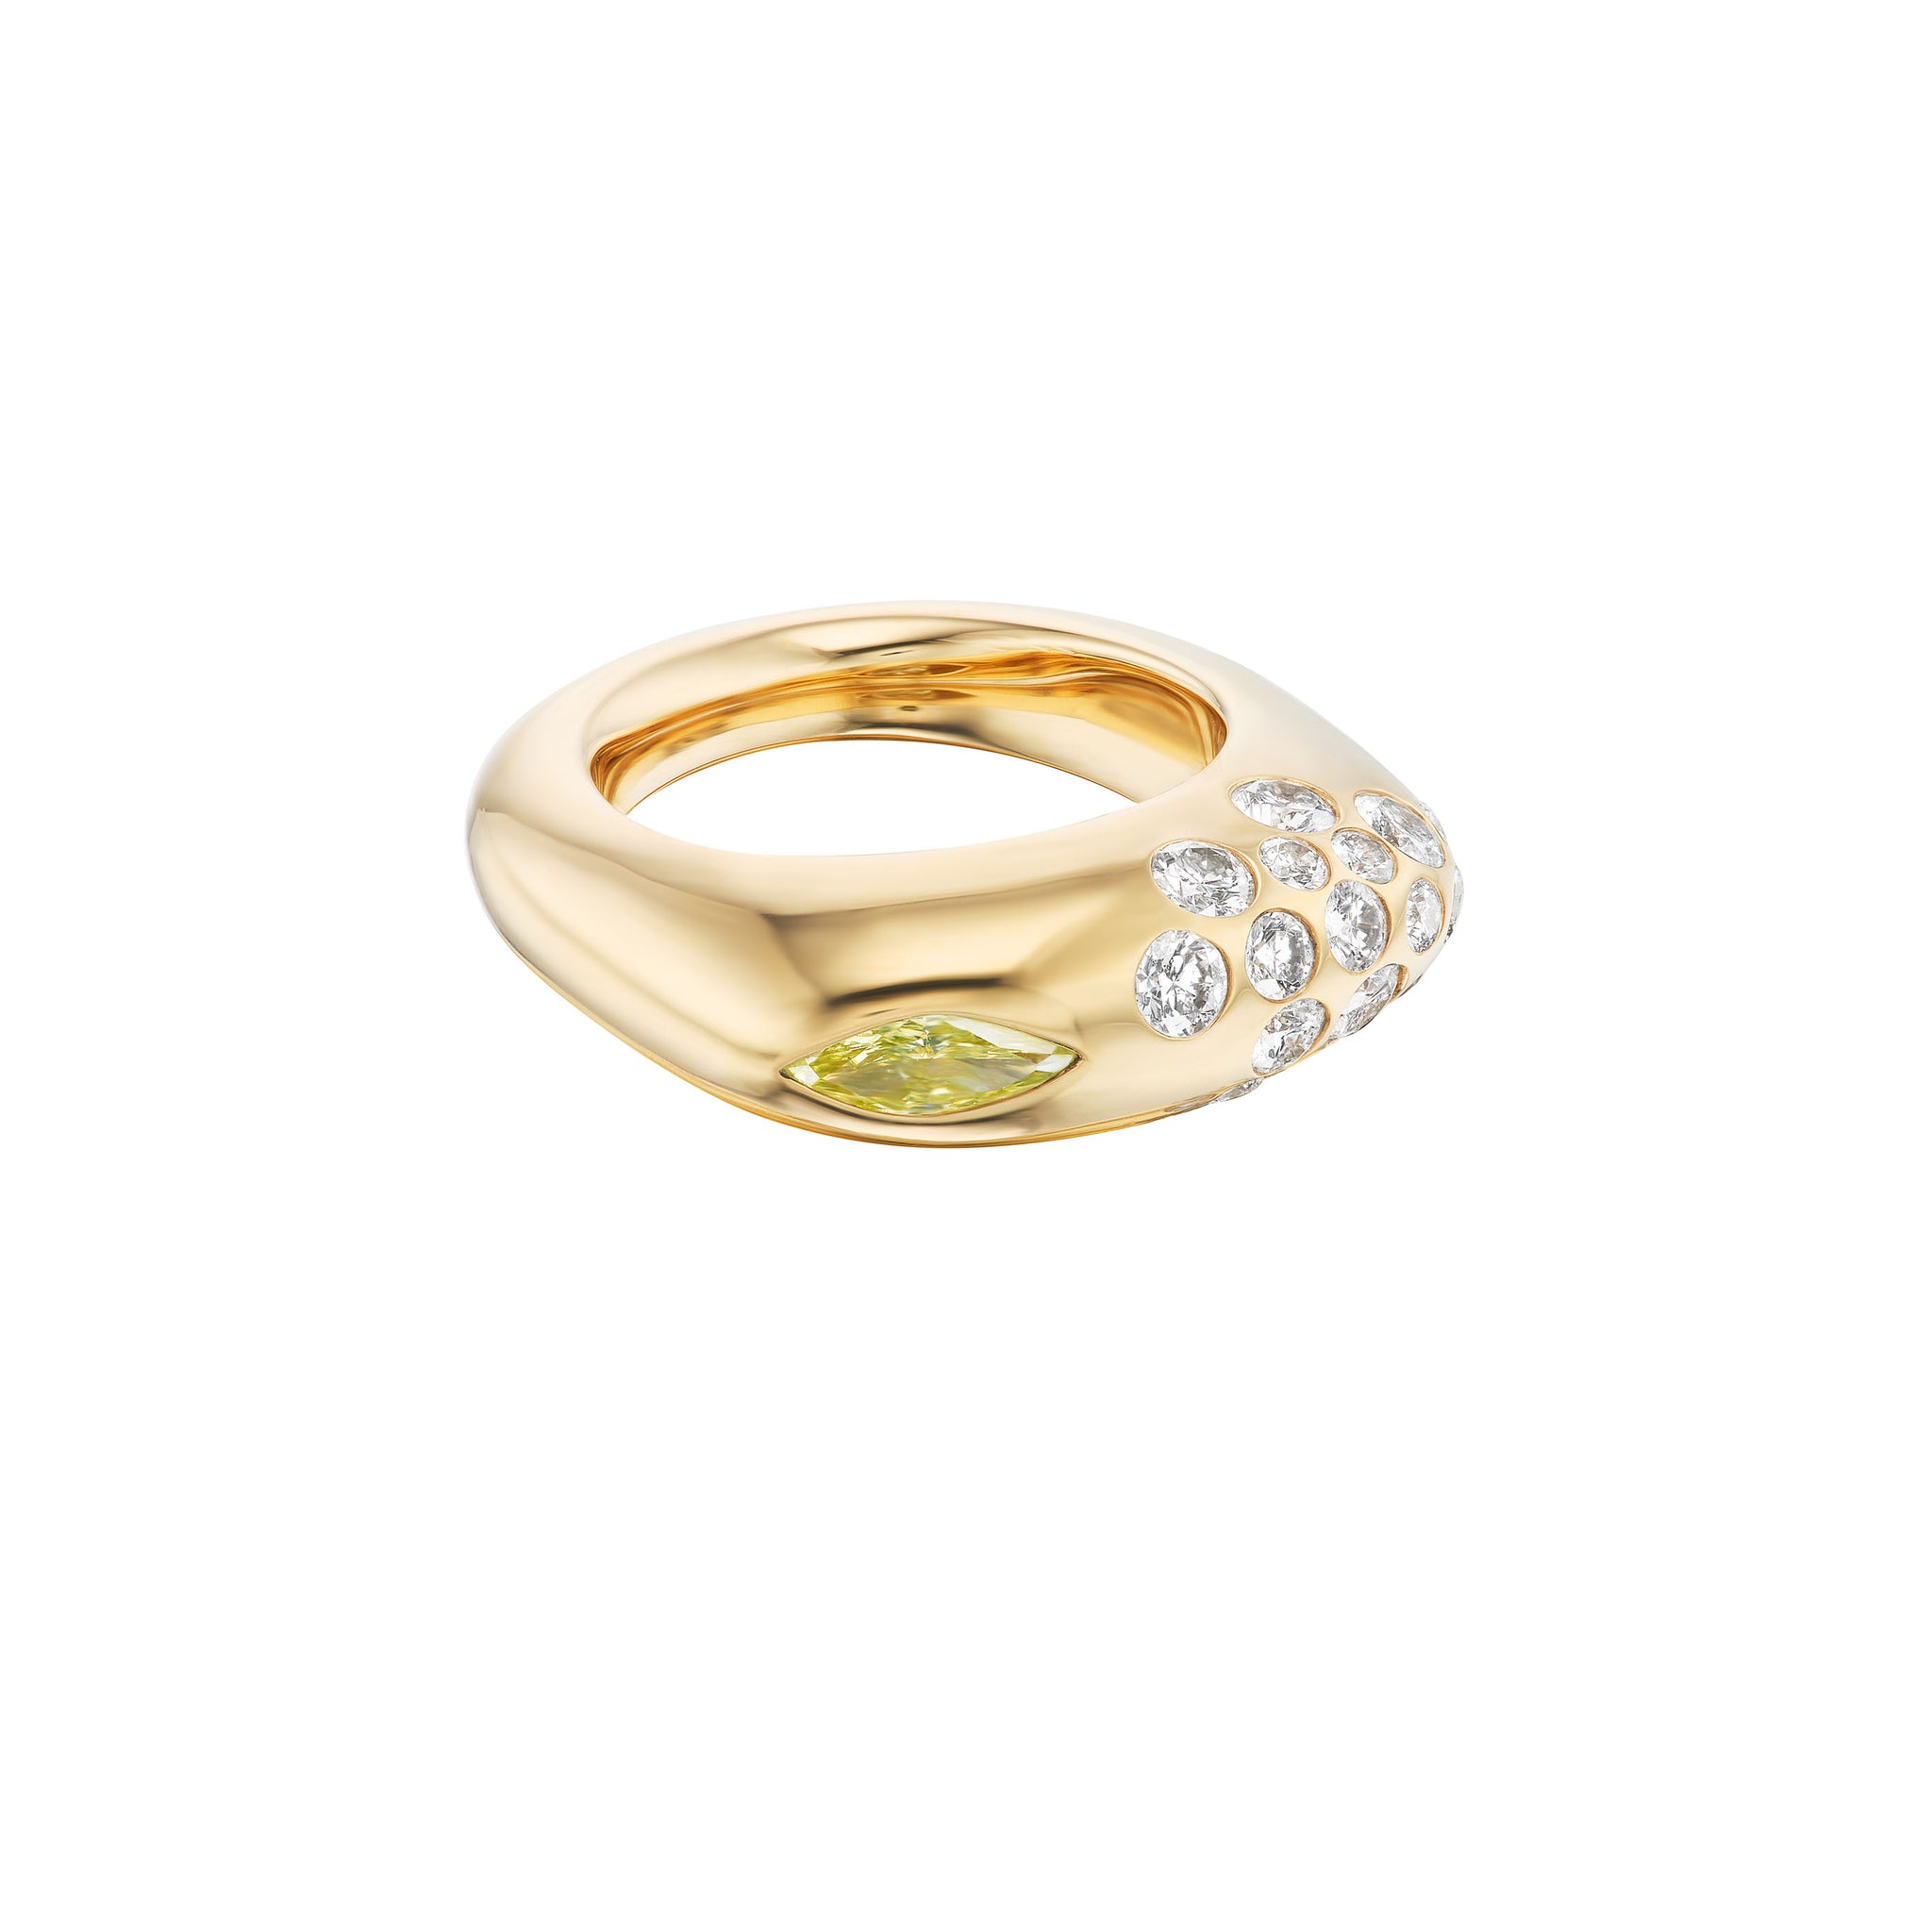 DOWRY RING